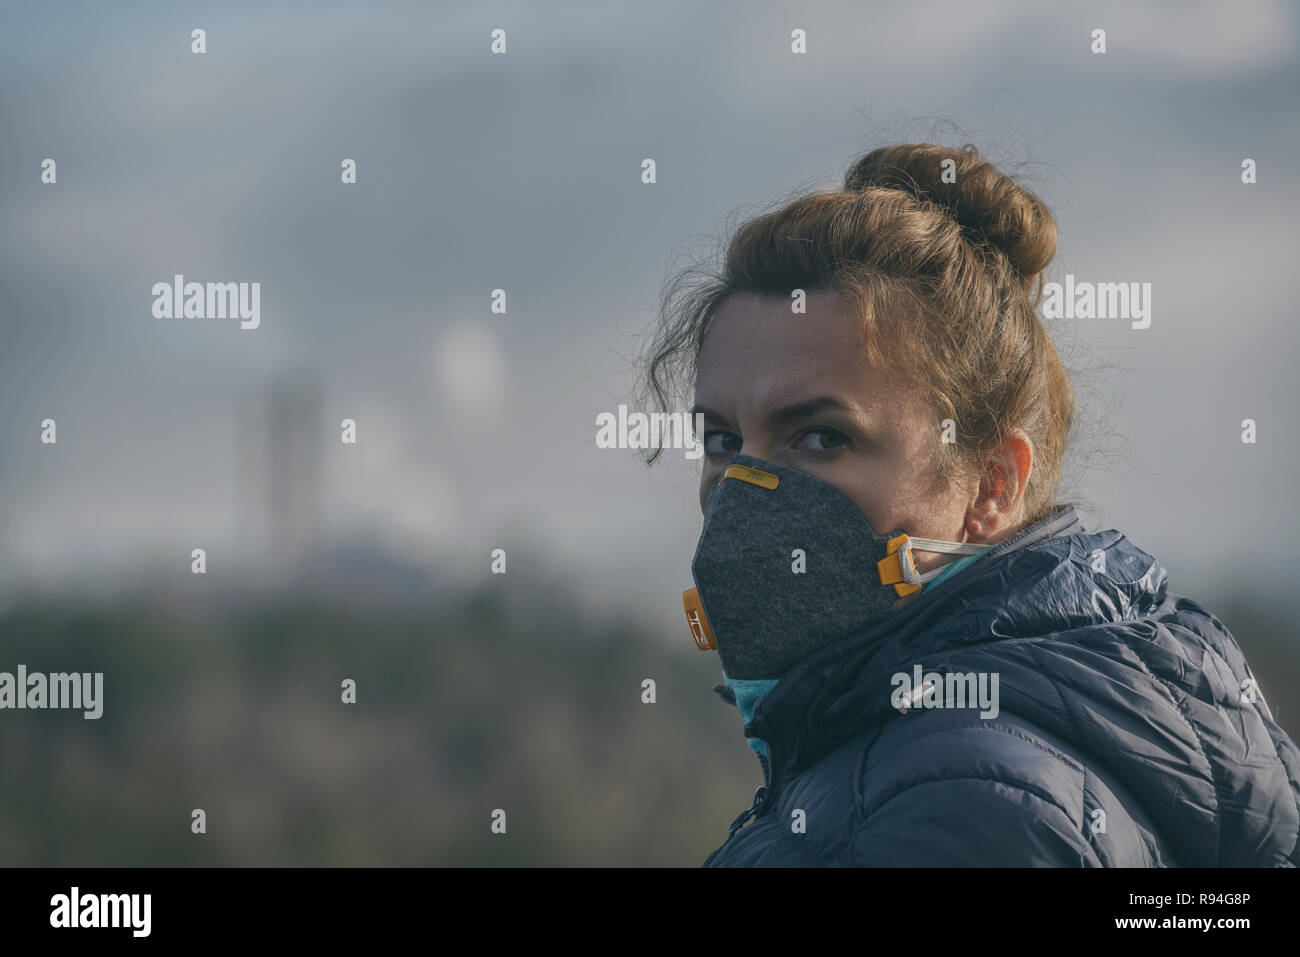 Woman wearing a real anti-pollution, anti-smog and viruses face mask; dense smog in air. Stock Photo